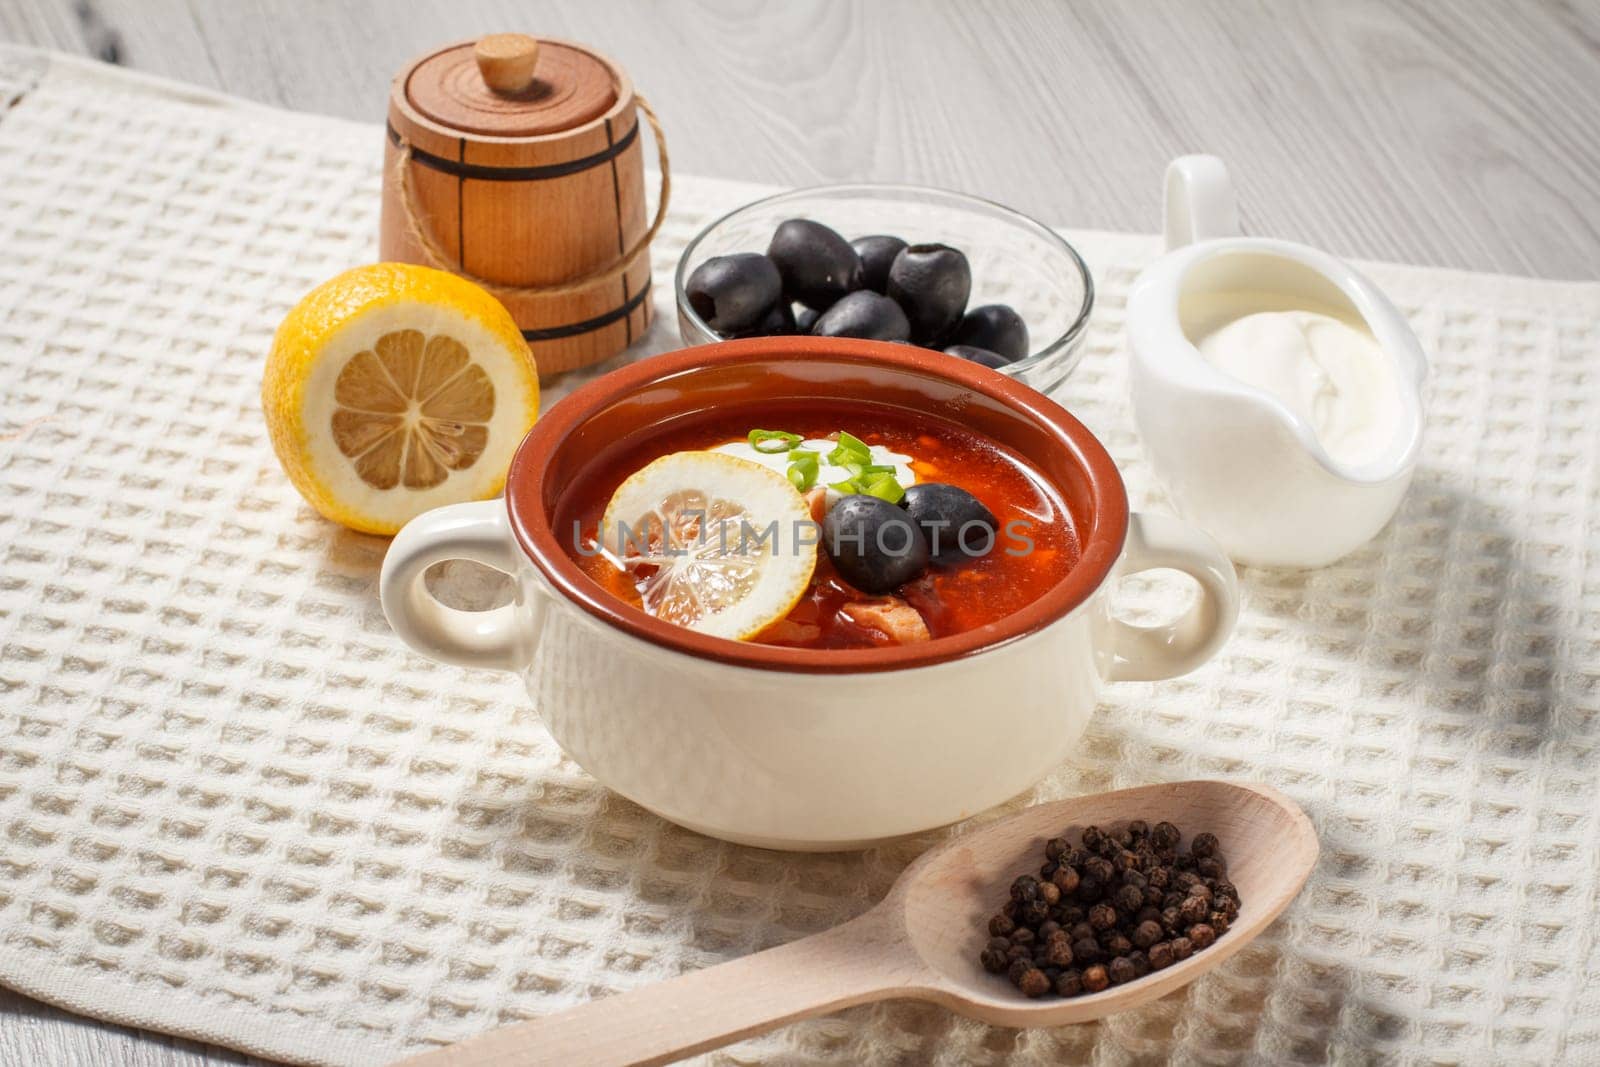 Soup saltwort with meat, sausages, potatoes, tomatoes, marinated pickled cucumber, lemon, black olives and sour cream with ingredients, wooden spoon with peppercorns on kitchen towel.